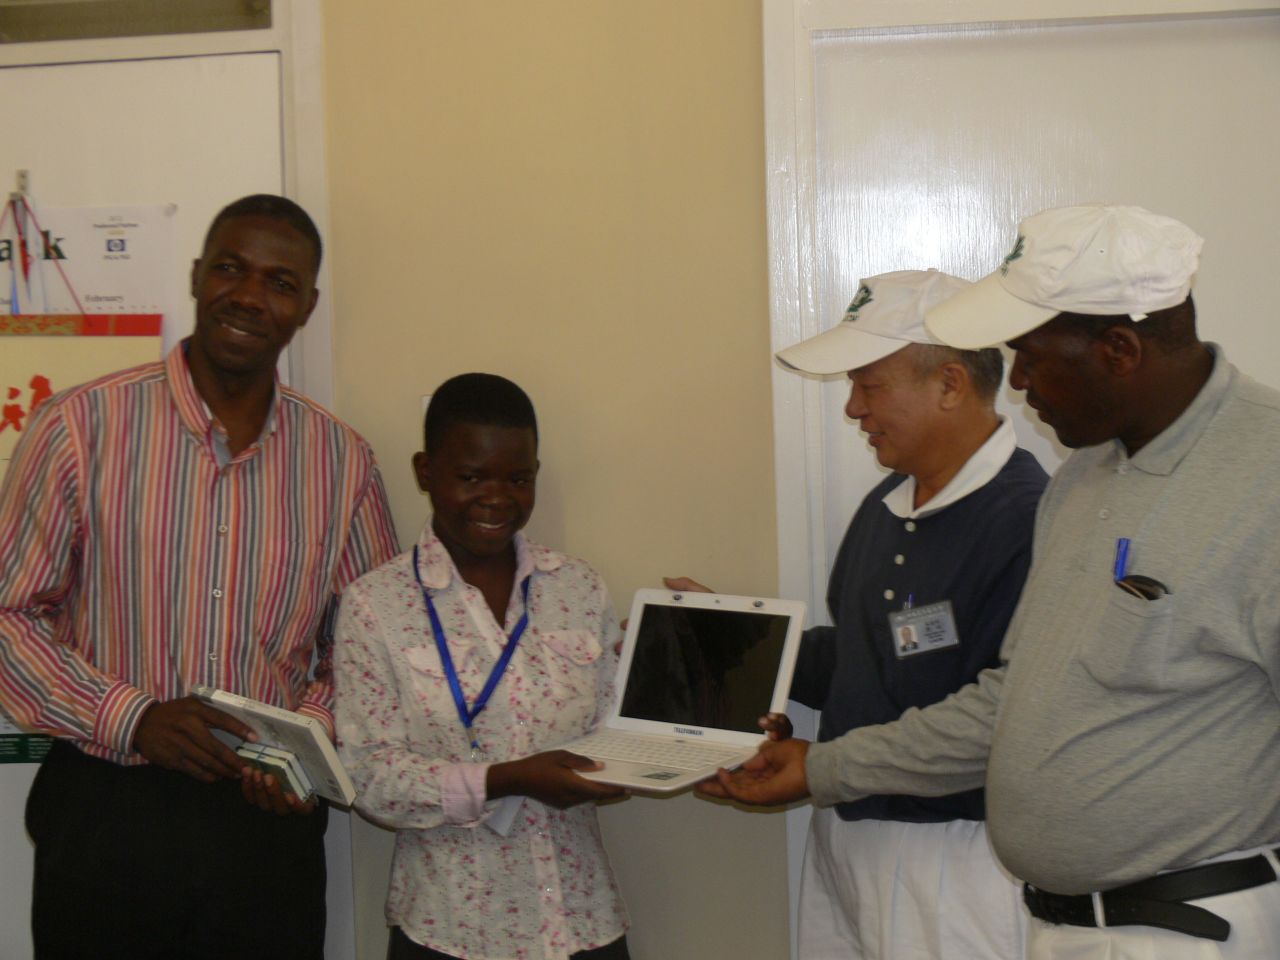 Maud, standing next to Munyaradzi Madambi, the dean of students at the University of Zimbabwe, received last week a donation of a laptop by the TZU CHI Foundation.